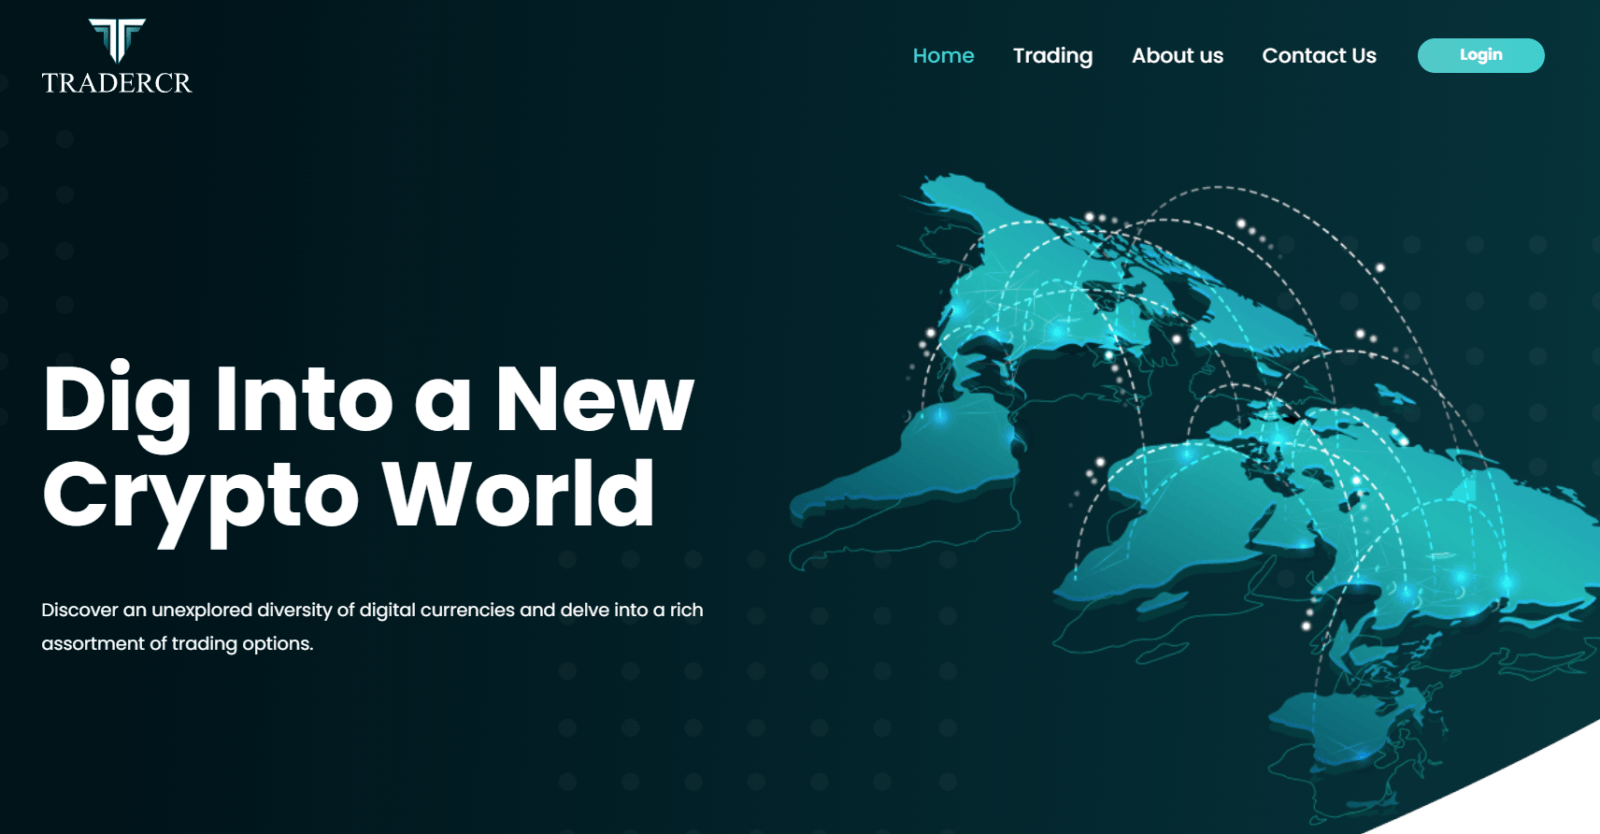 Tradercr - official site